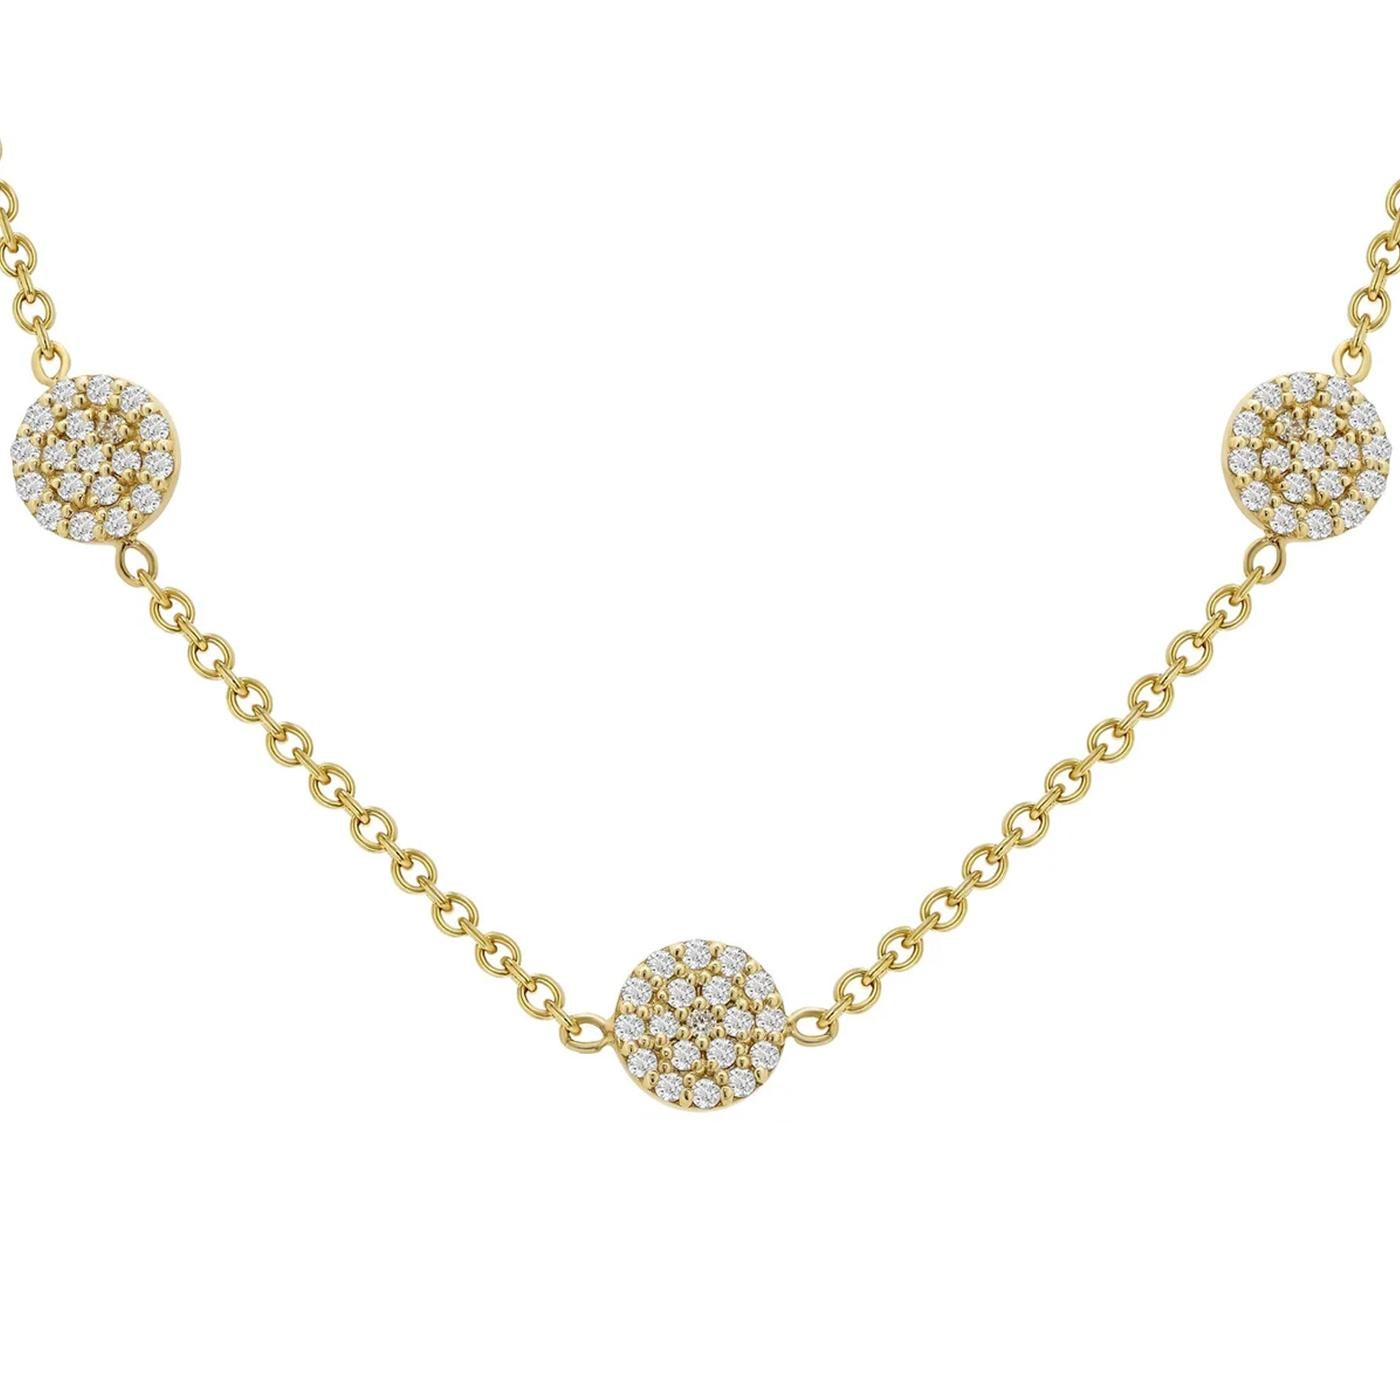 This luxurious Five Moons choker/necklace comes with a diamond. Its adjustable chain allows for a personalized fit, ensuring ultimate comfort and style.

Details:
Necklace Type: Moons Necklace
Shape Style: Round Cut
Material: Yellow Gold
Clasp Type: